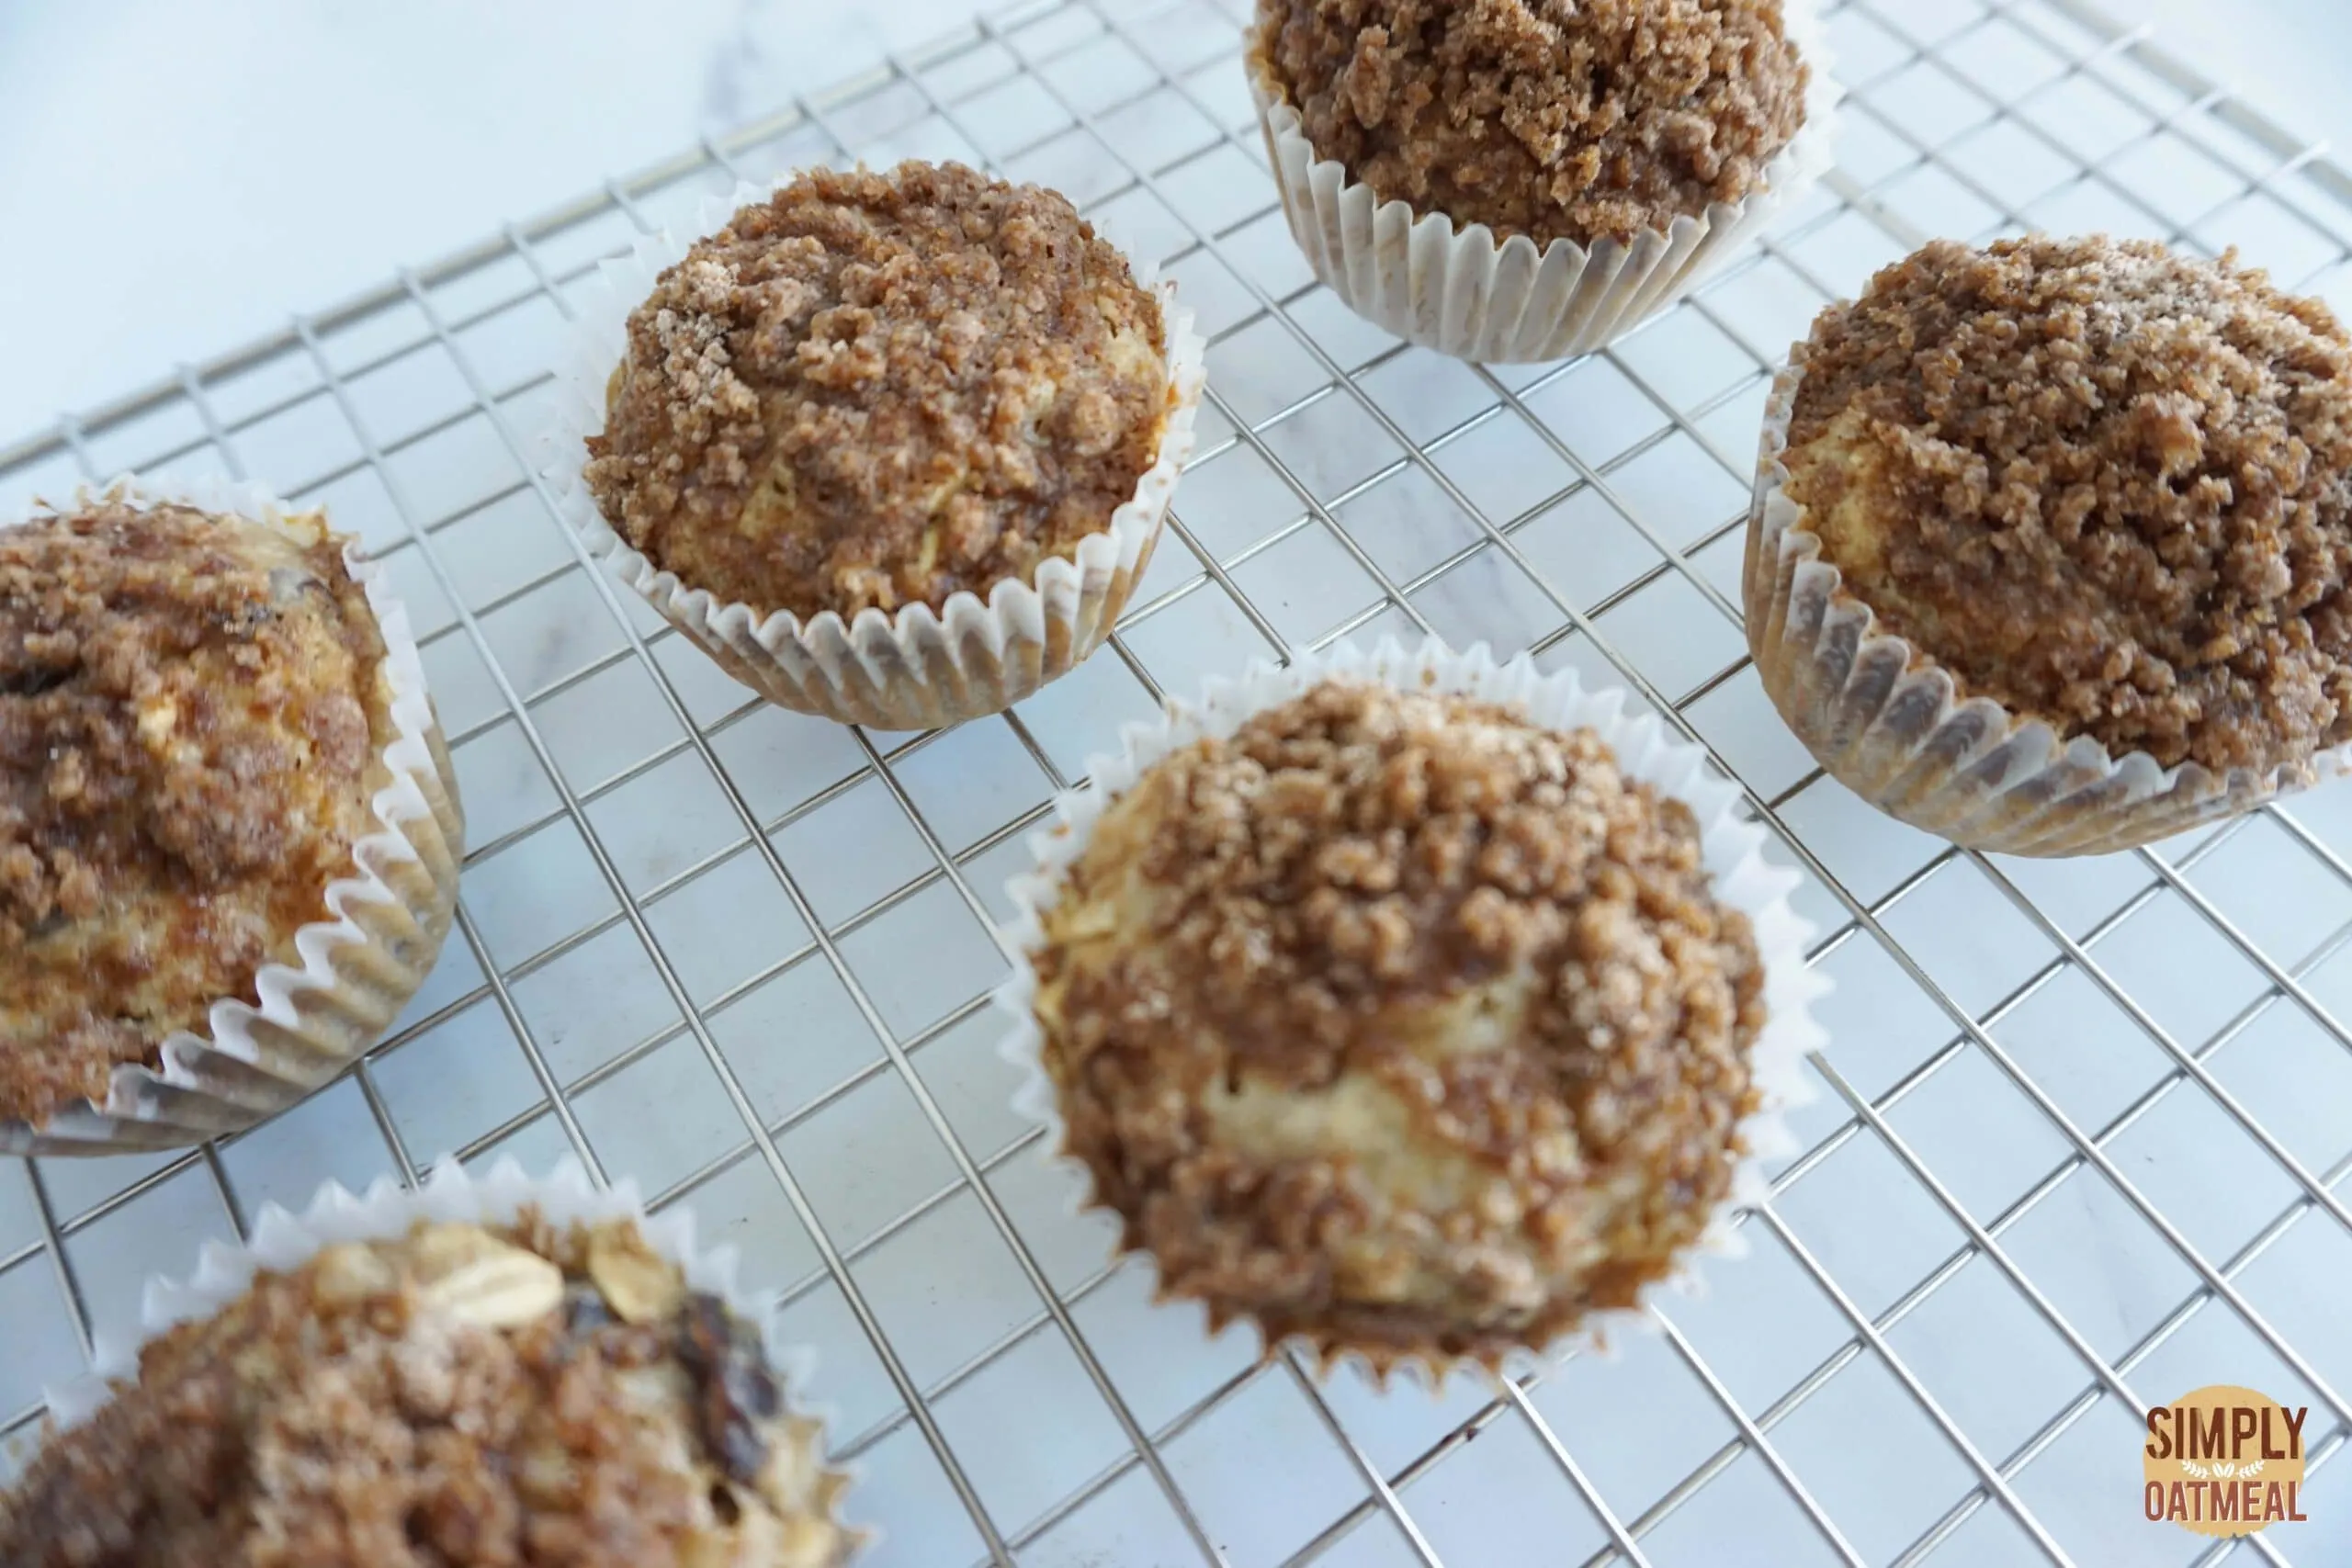 Cinnamon streusel oatmeal muffins cooling on wire rack